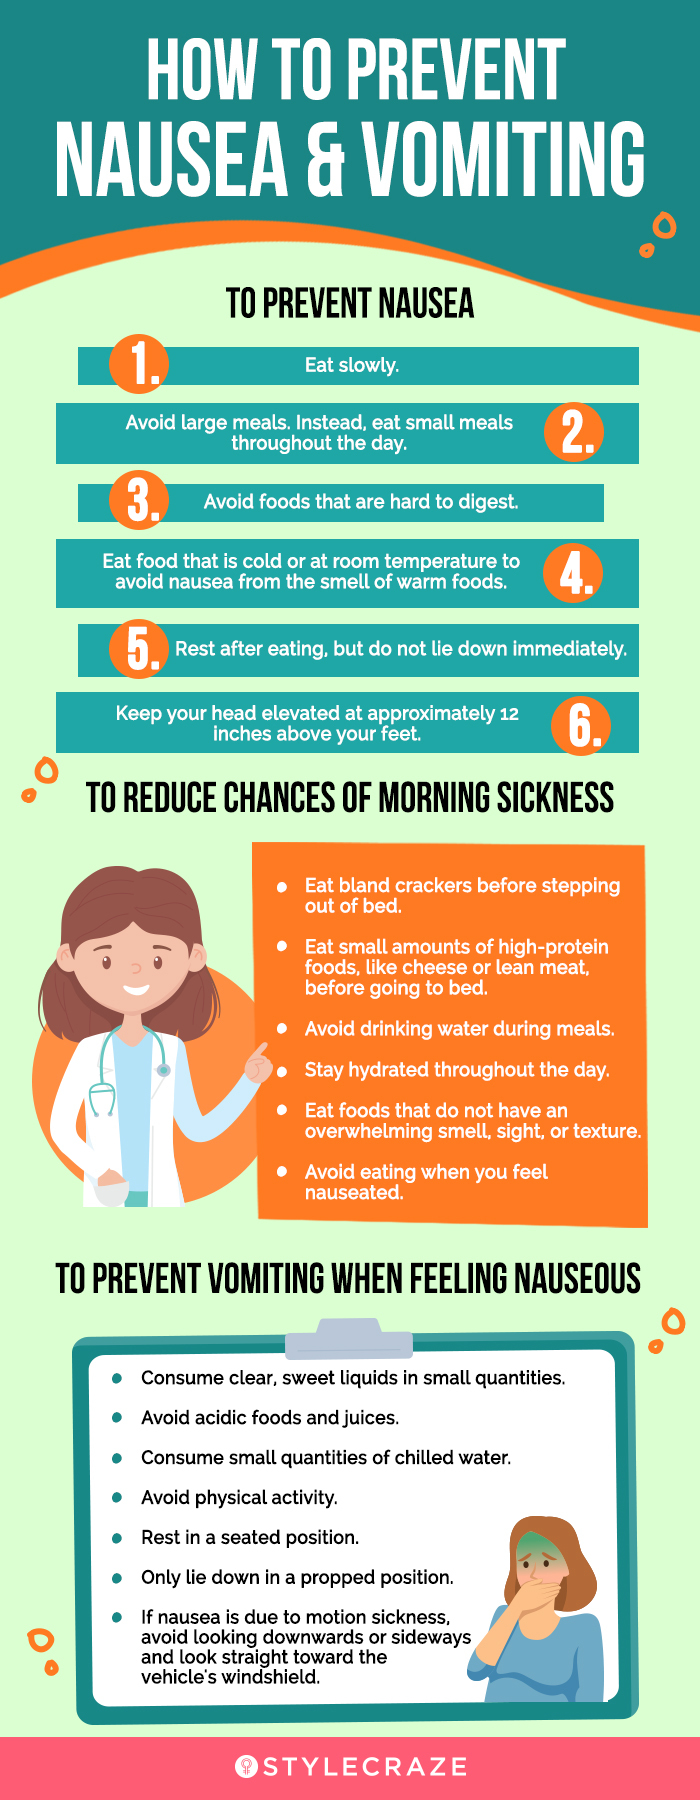 how to prevent nausea and vomiting [infographic]